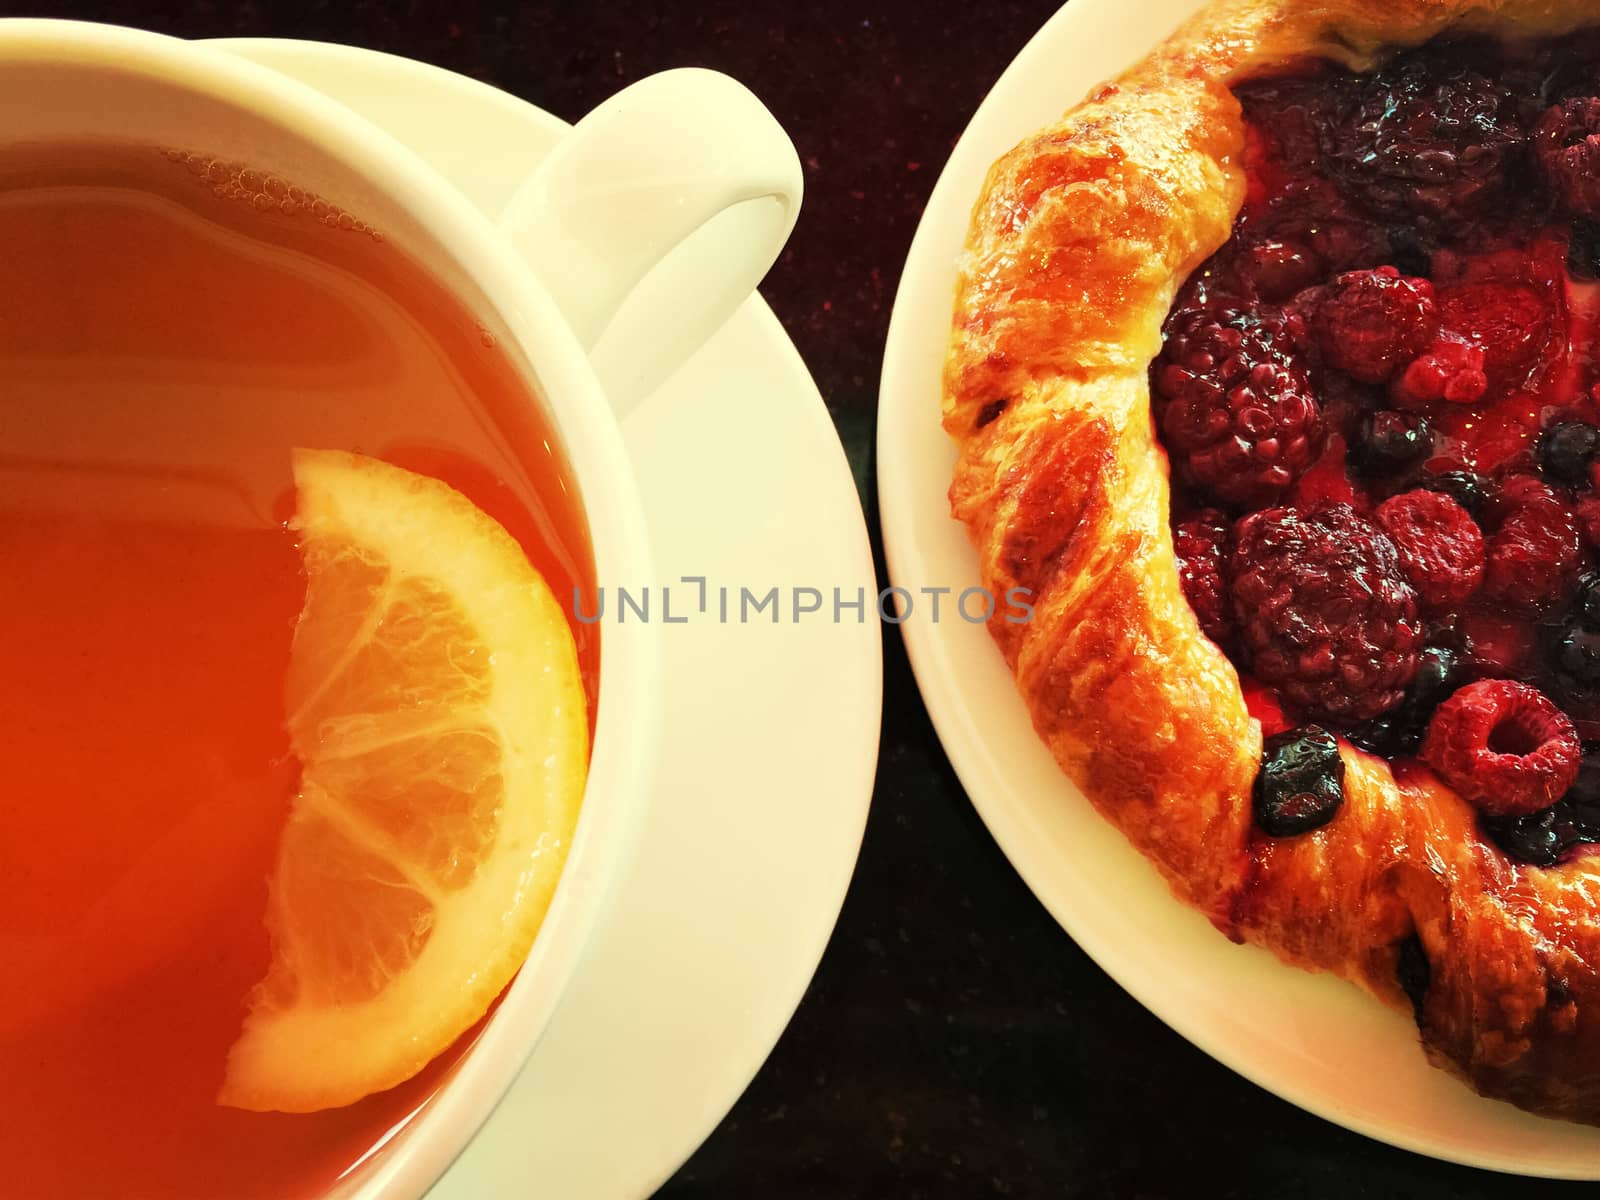 Raspberry pastry and a cup of tea with lemon.